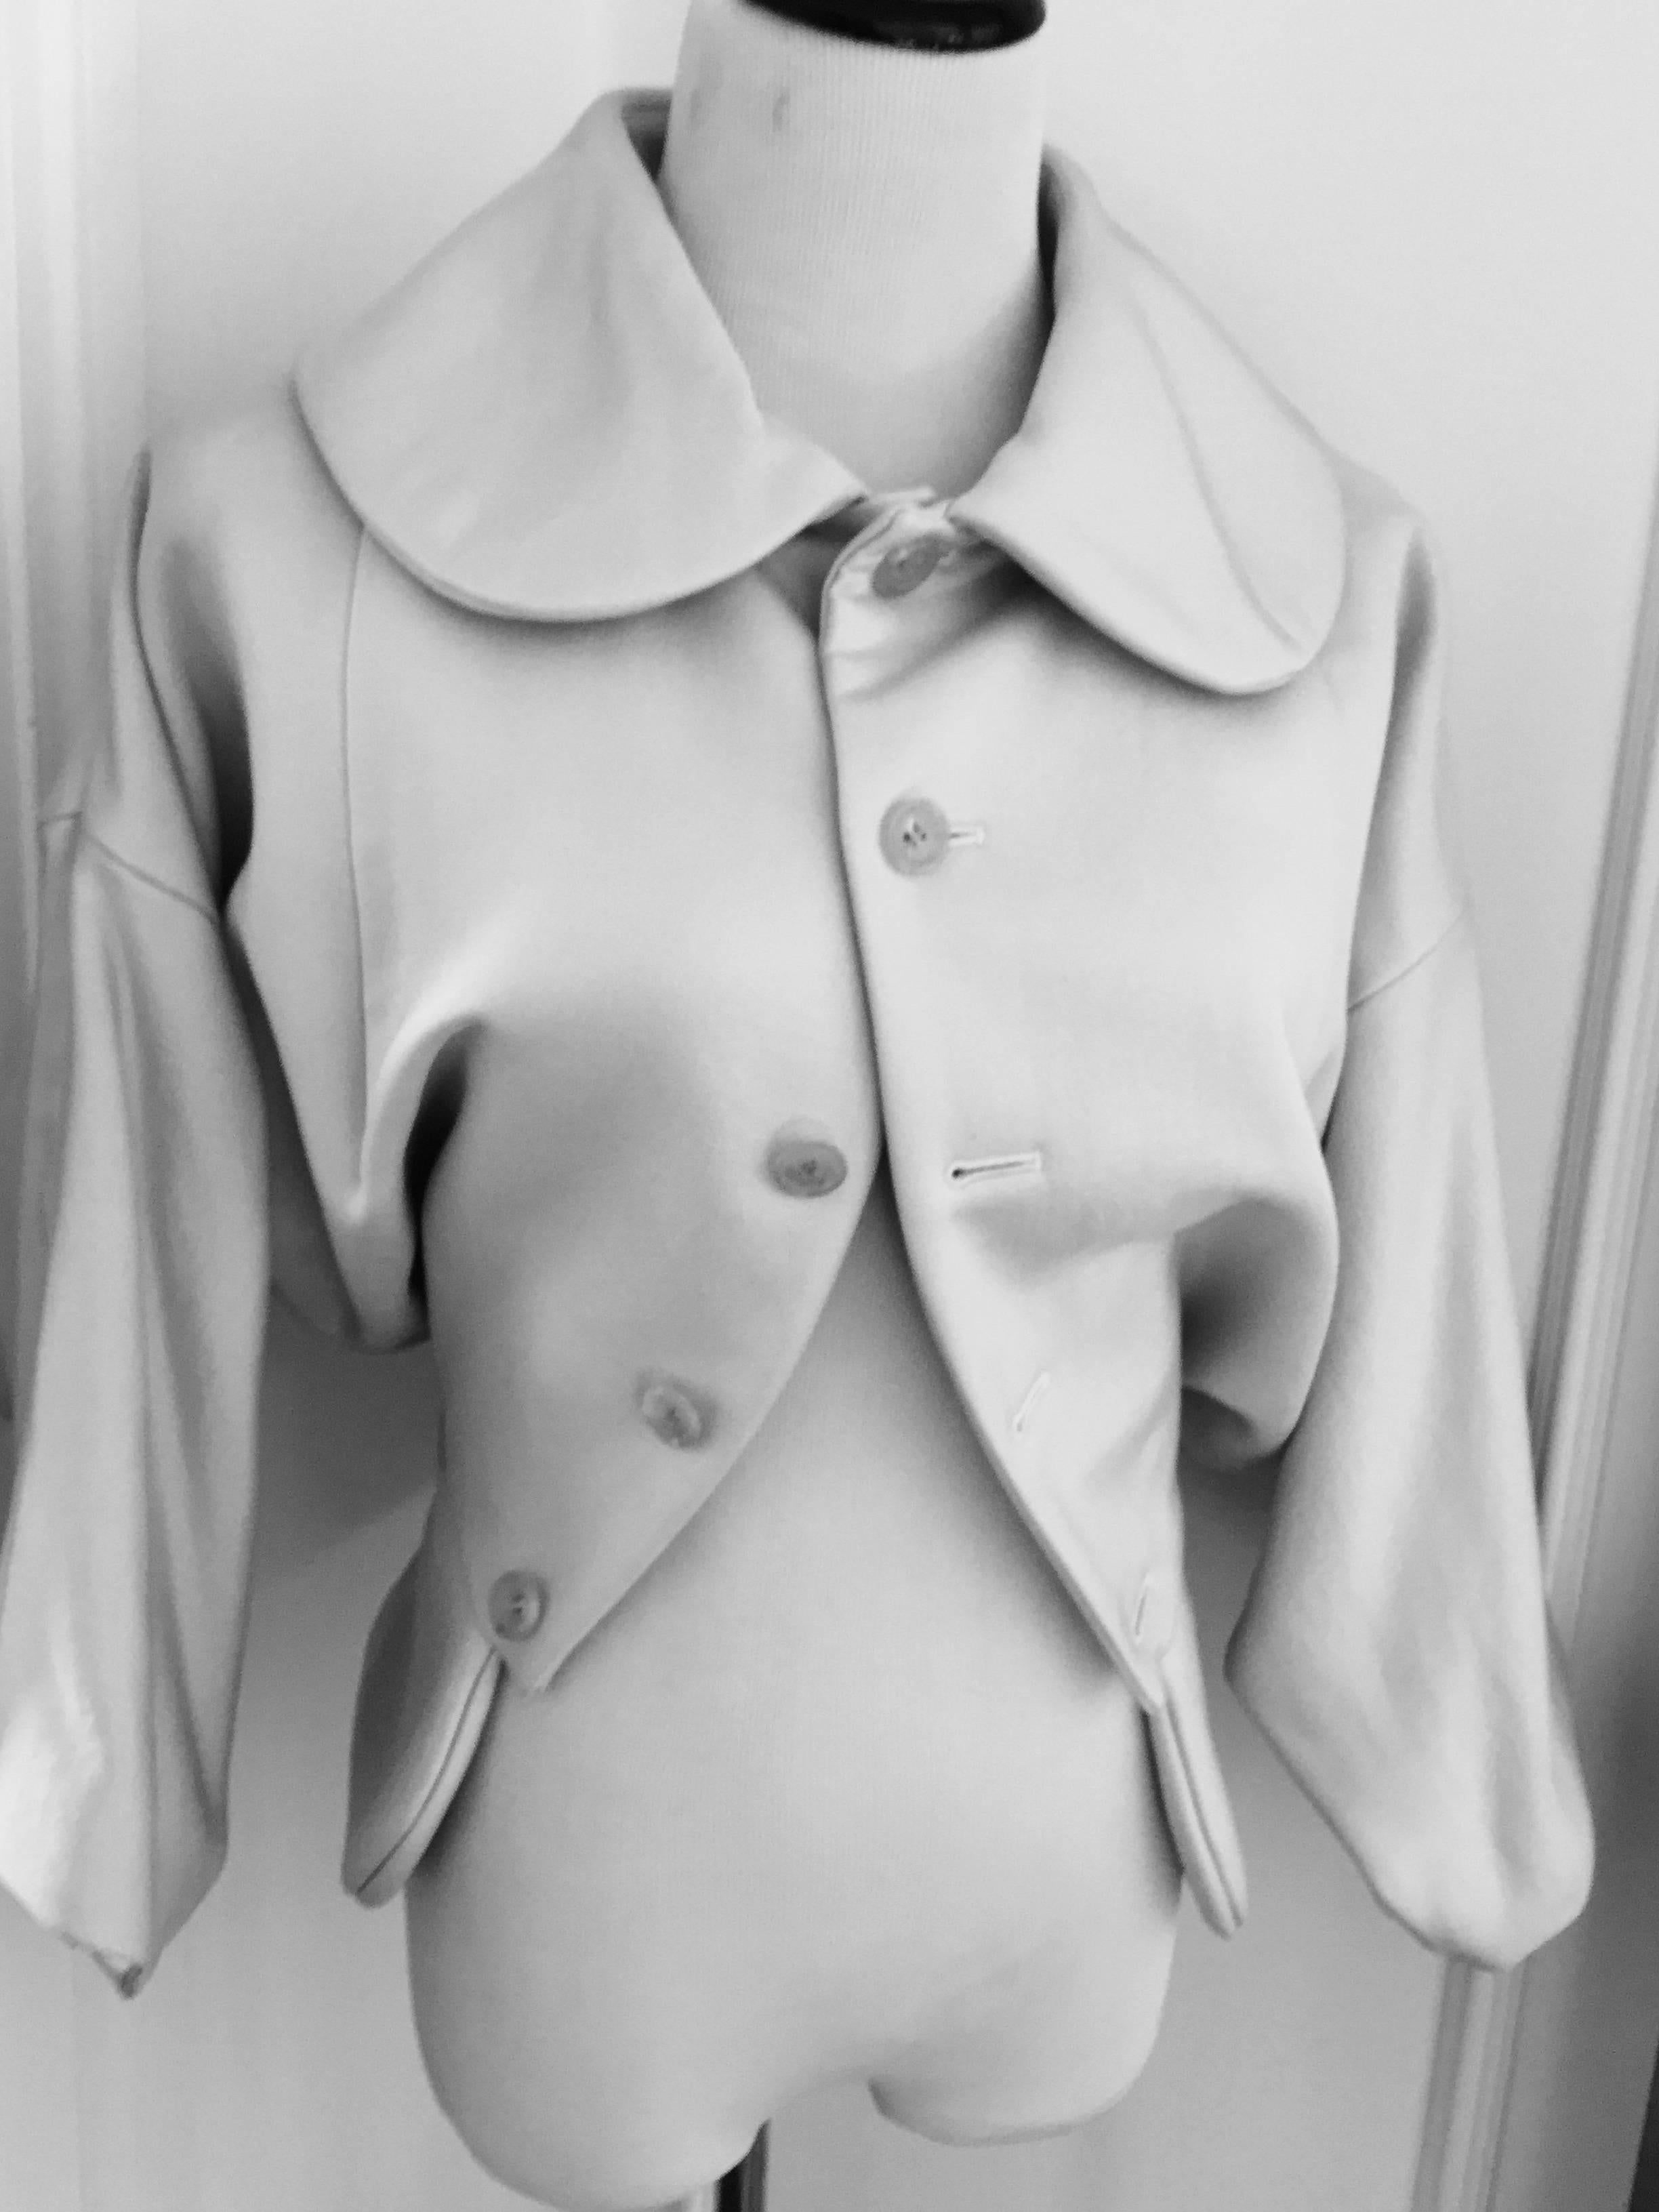 Feminine bolero jacket with large round collar...
3/4 wide sleeves...fabric is heavy with a faint shimmer...
perfect and elegant to wear over a long dress or as an elegant jacket for a night out...
Fits more like a S/M